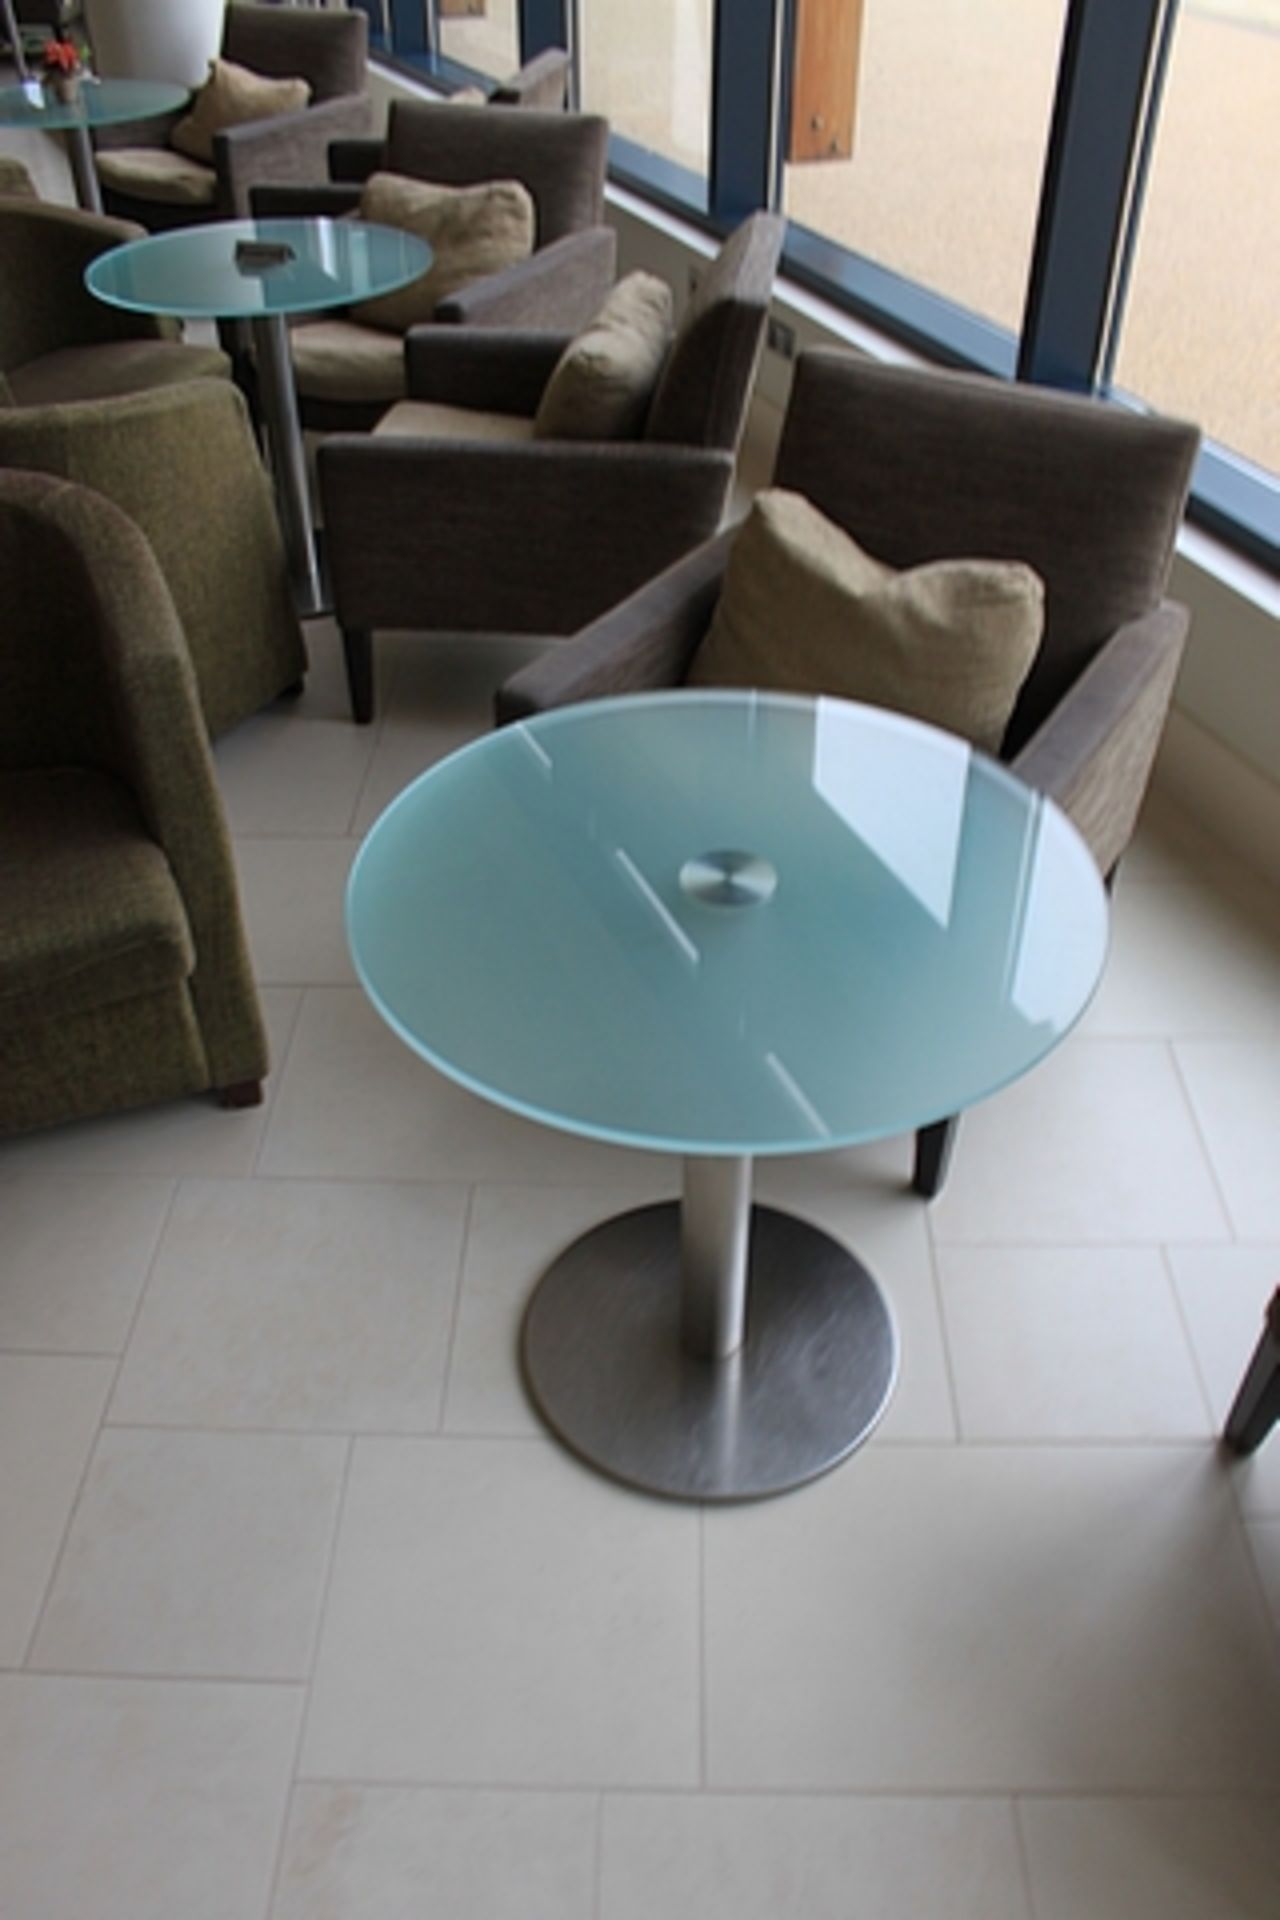 Kesterport Inox Round Circular Table Glass Top Brushed Stainless-Steel Pedestal & Base With 10mm - Image 2 of 3